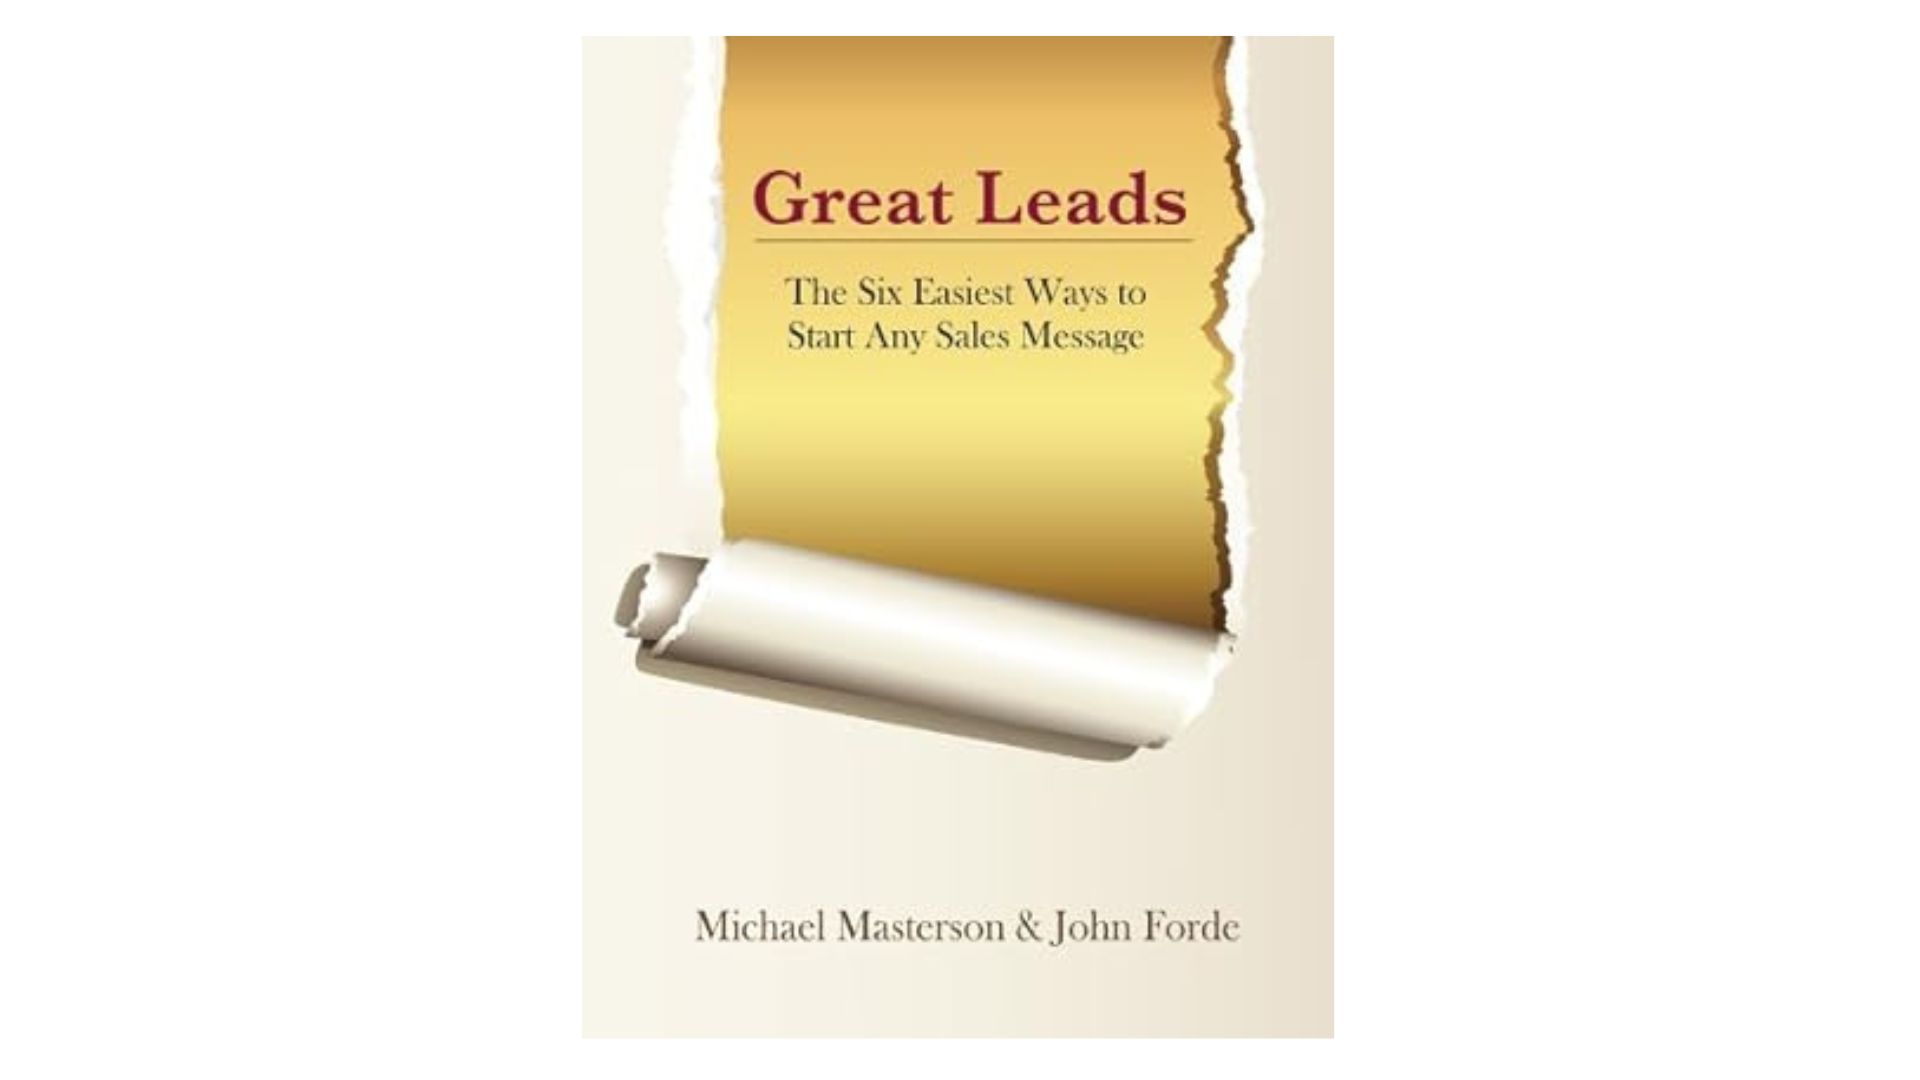 Great Leads: The Six Easiest Ways to Start Any Sales Message (English Edition)